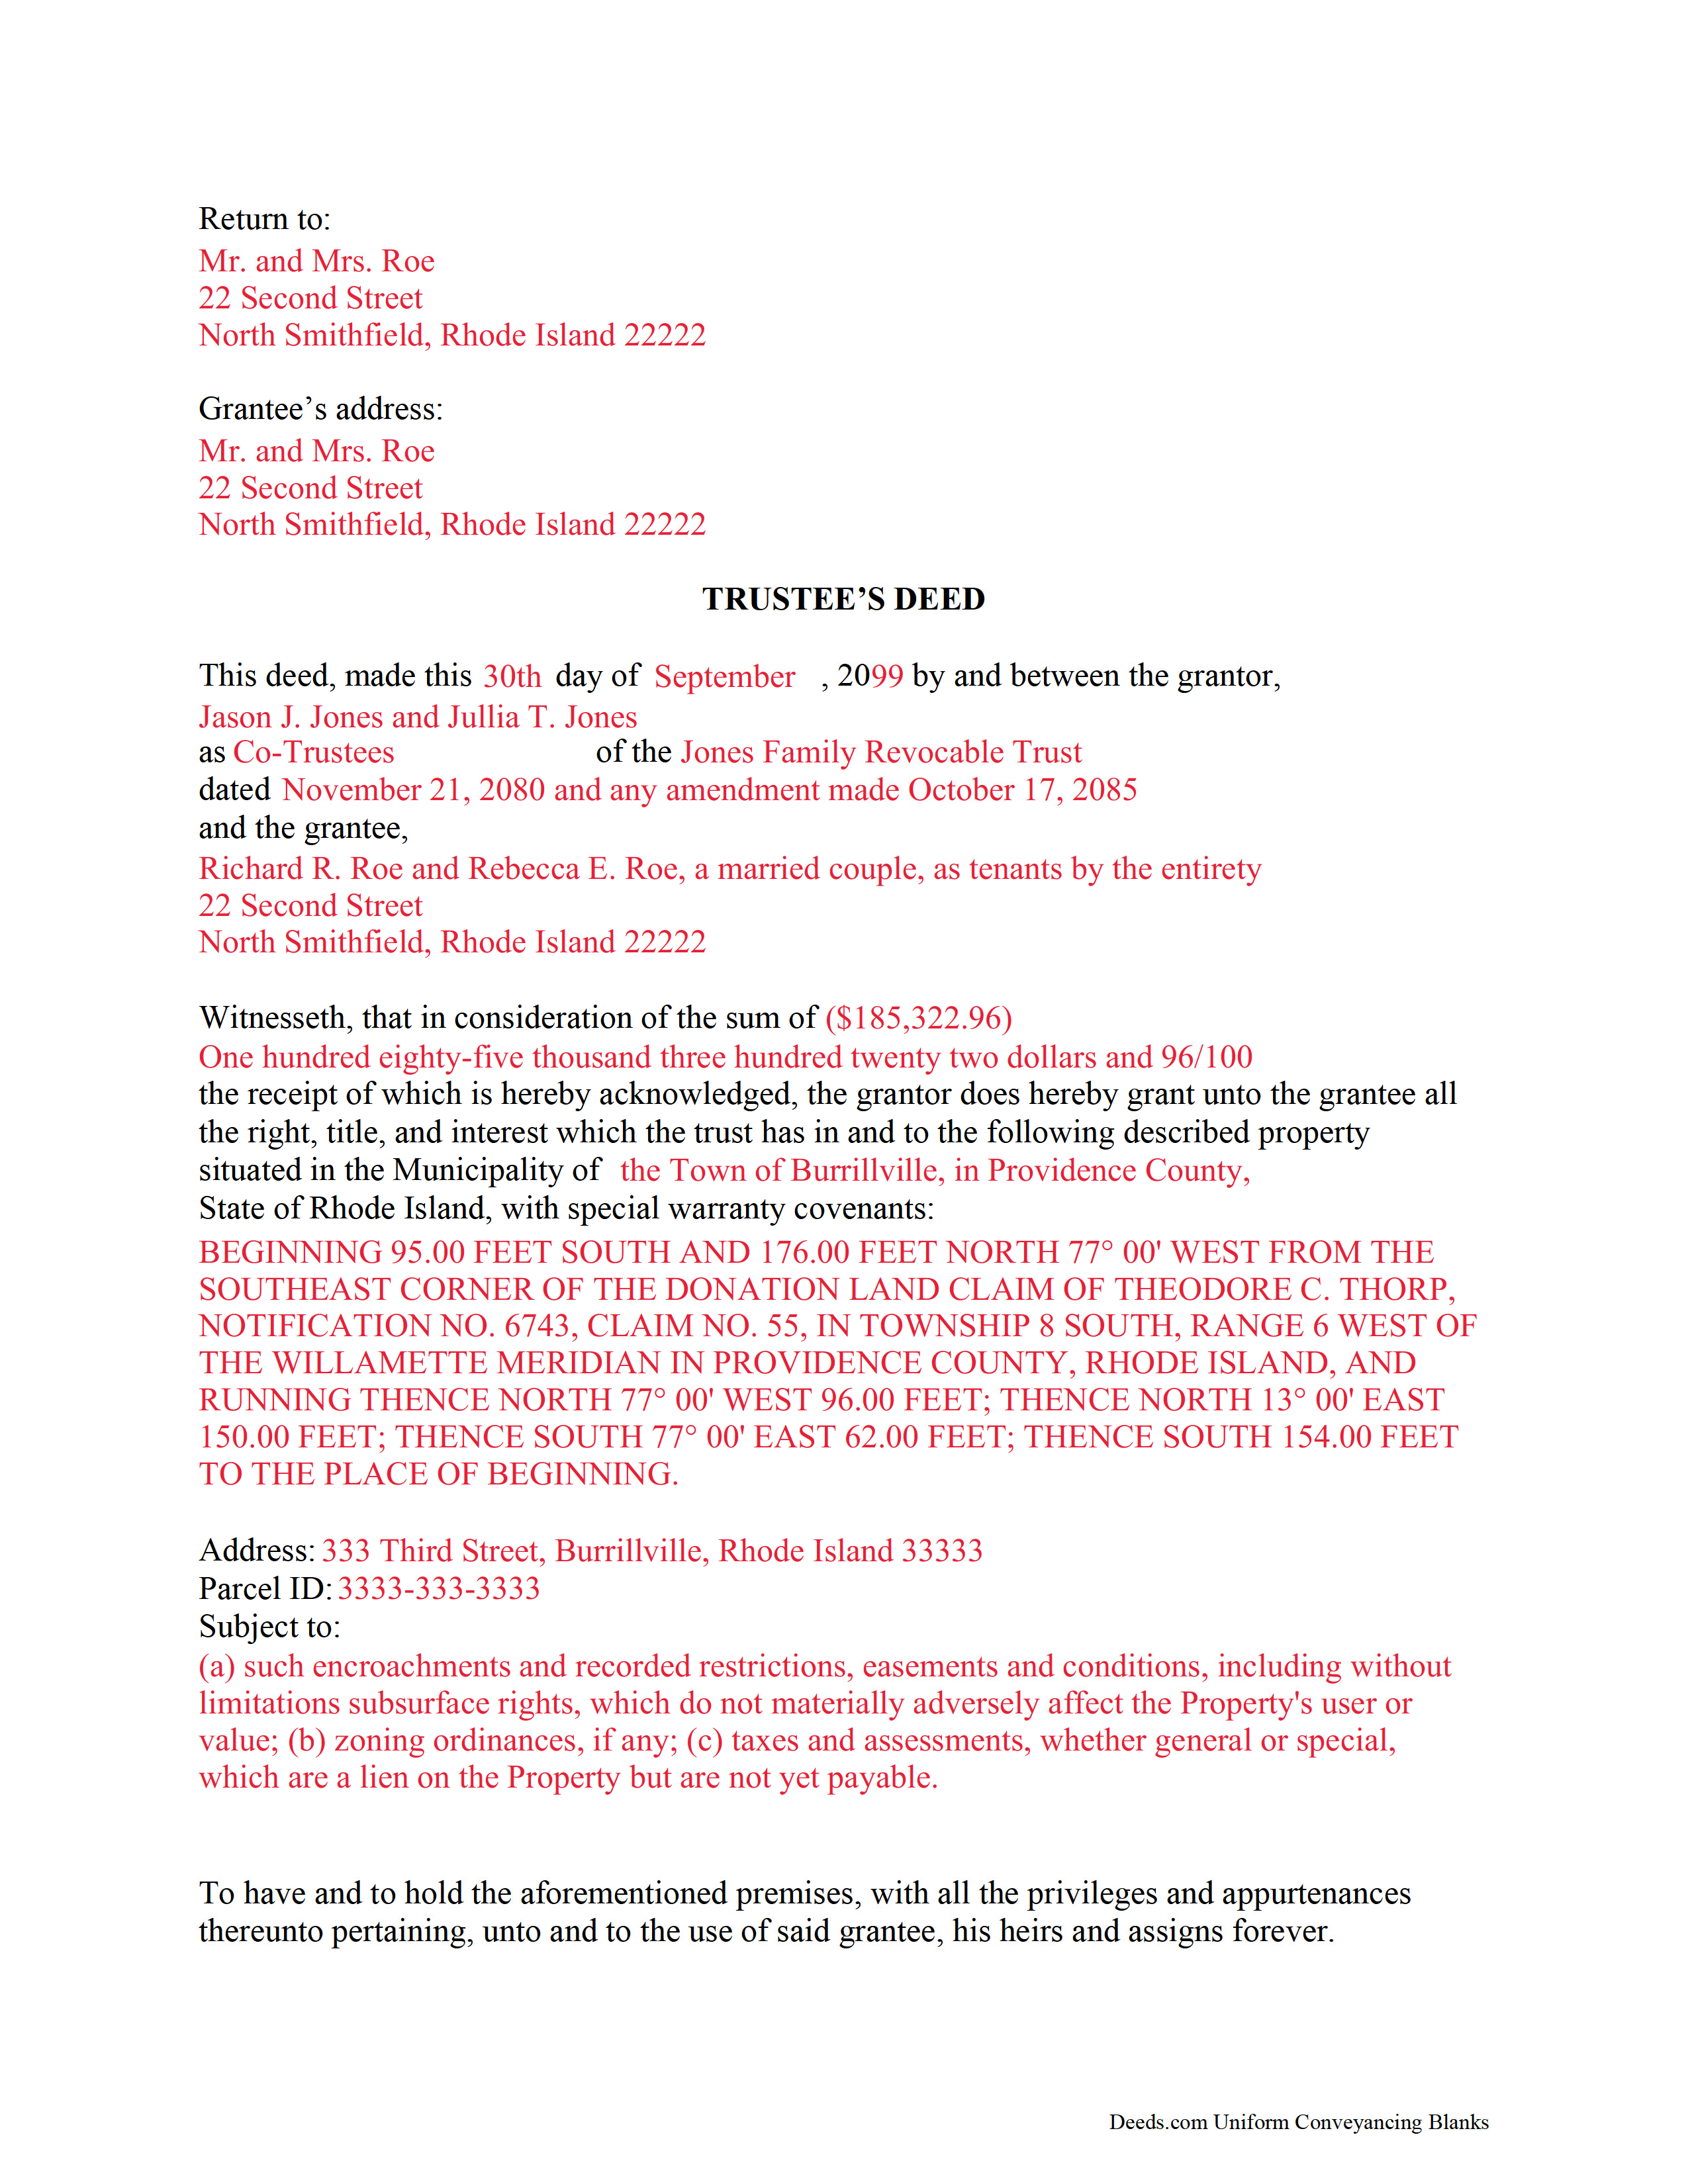 Completed Example of the Trustee Deed Document